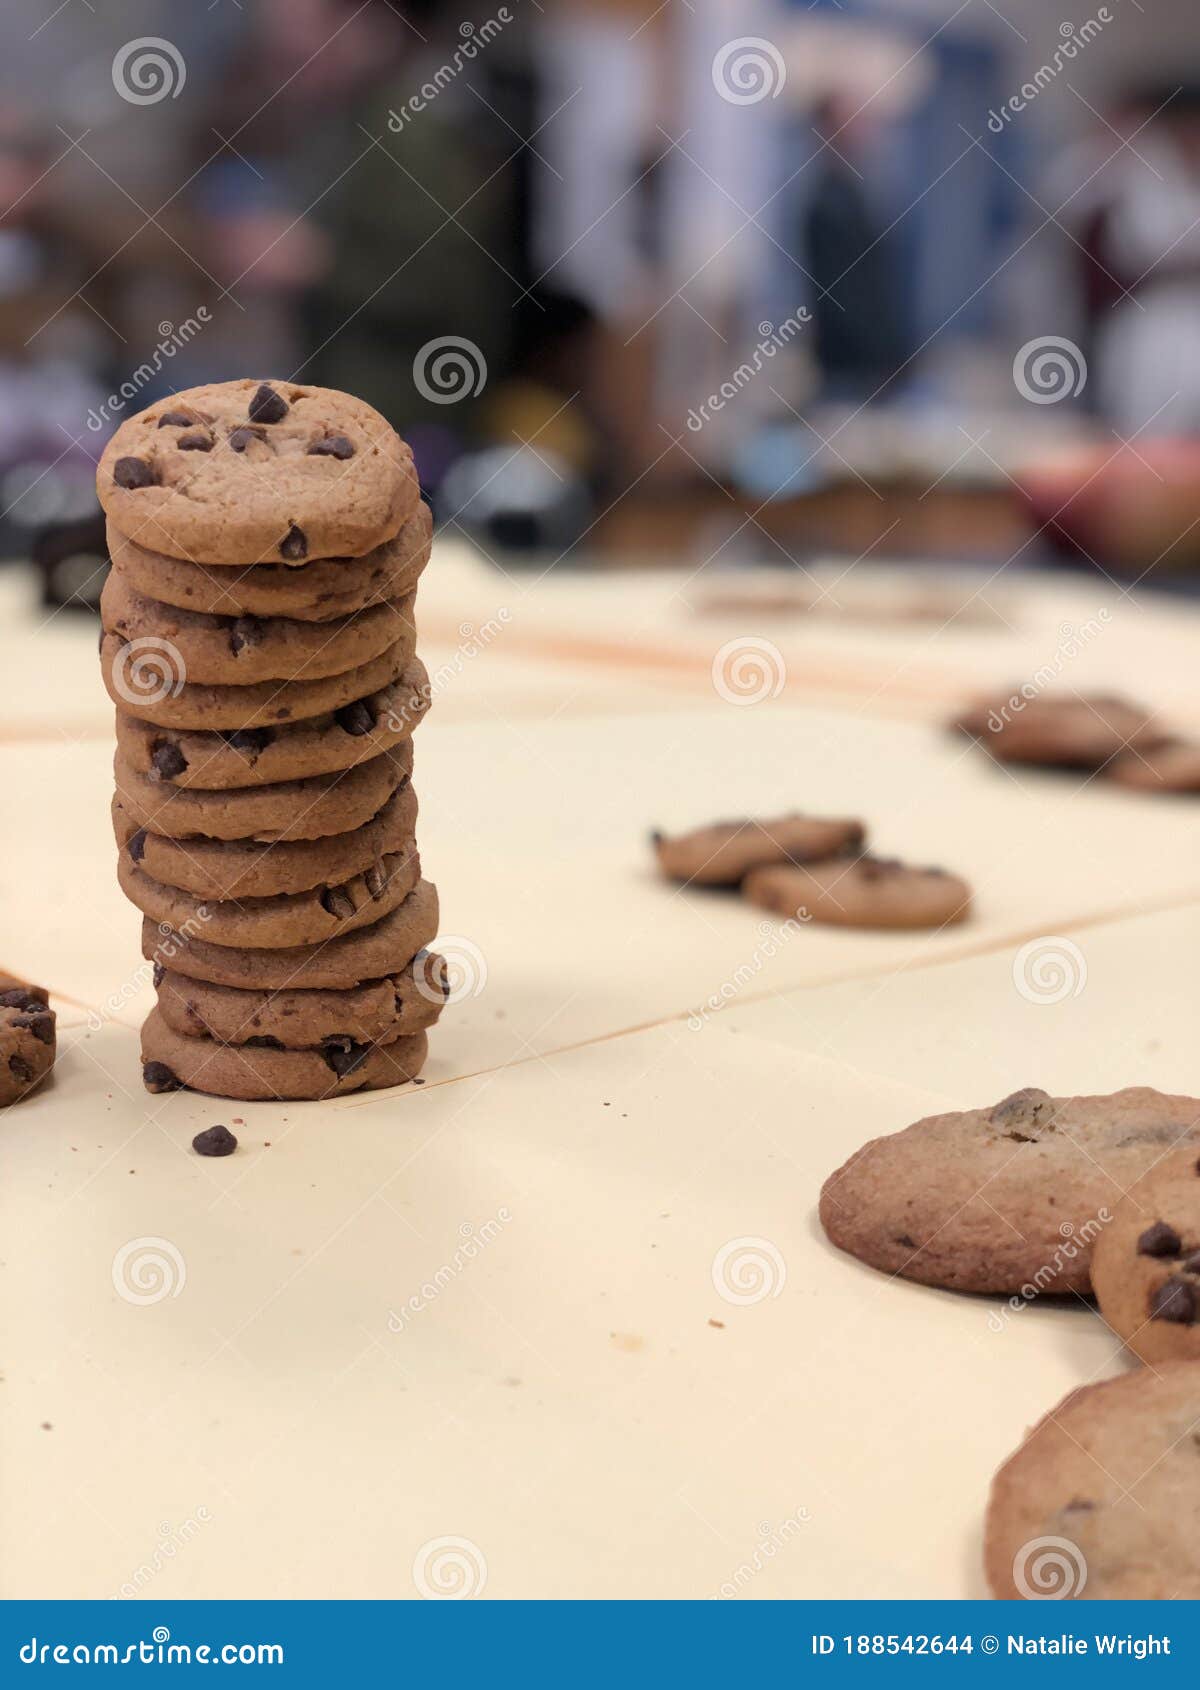 158 Chips Ahoy! Royalty-Free Photos and Stock Images